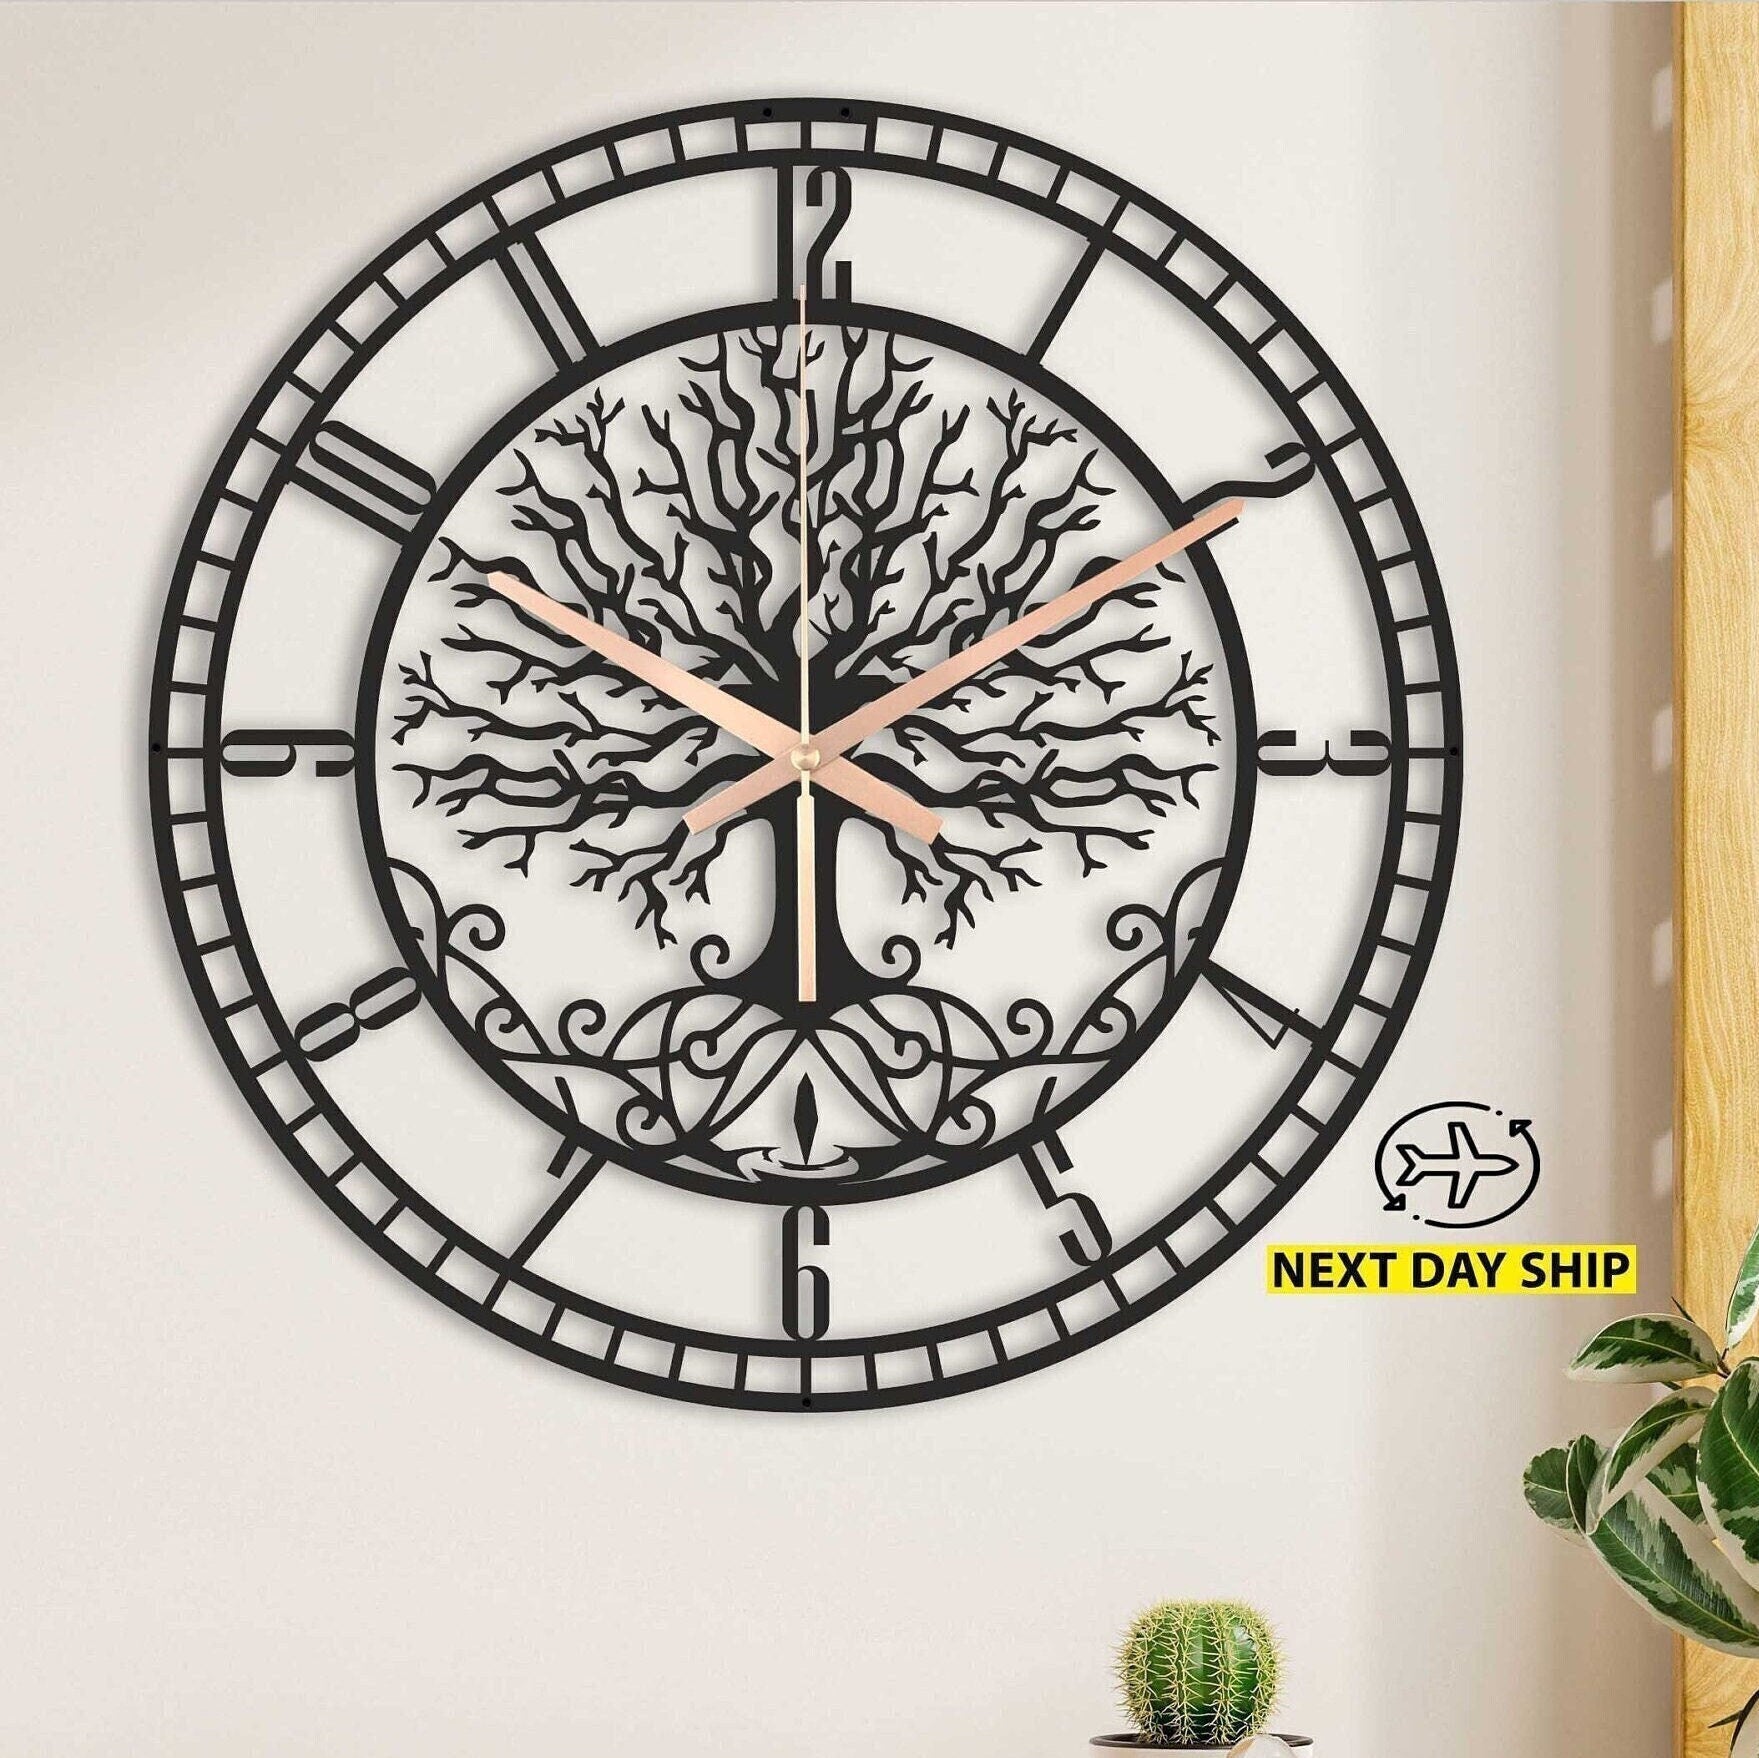 Large Tree Of Life Clock, Metal Wall Clock, Unique Wall Clock, Oversized Wall Clock, Living Room Wall Clocks With Numbers, Clocks For Wall